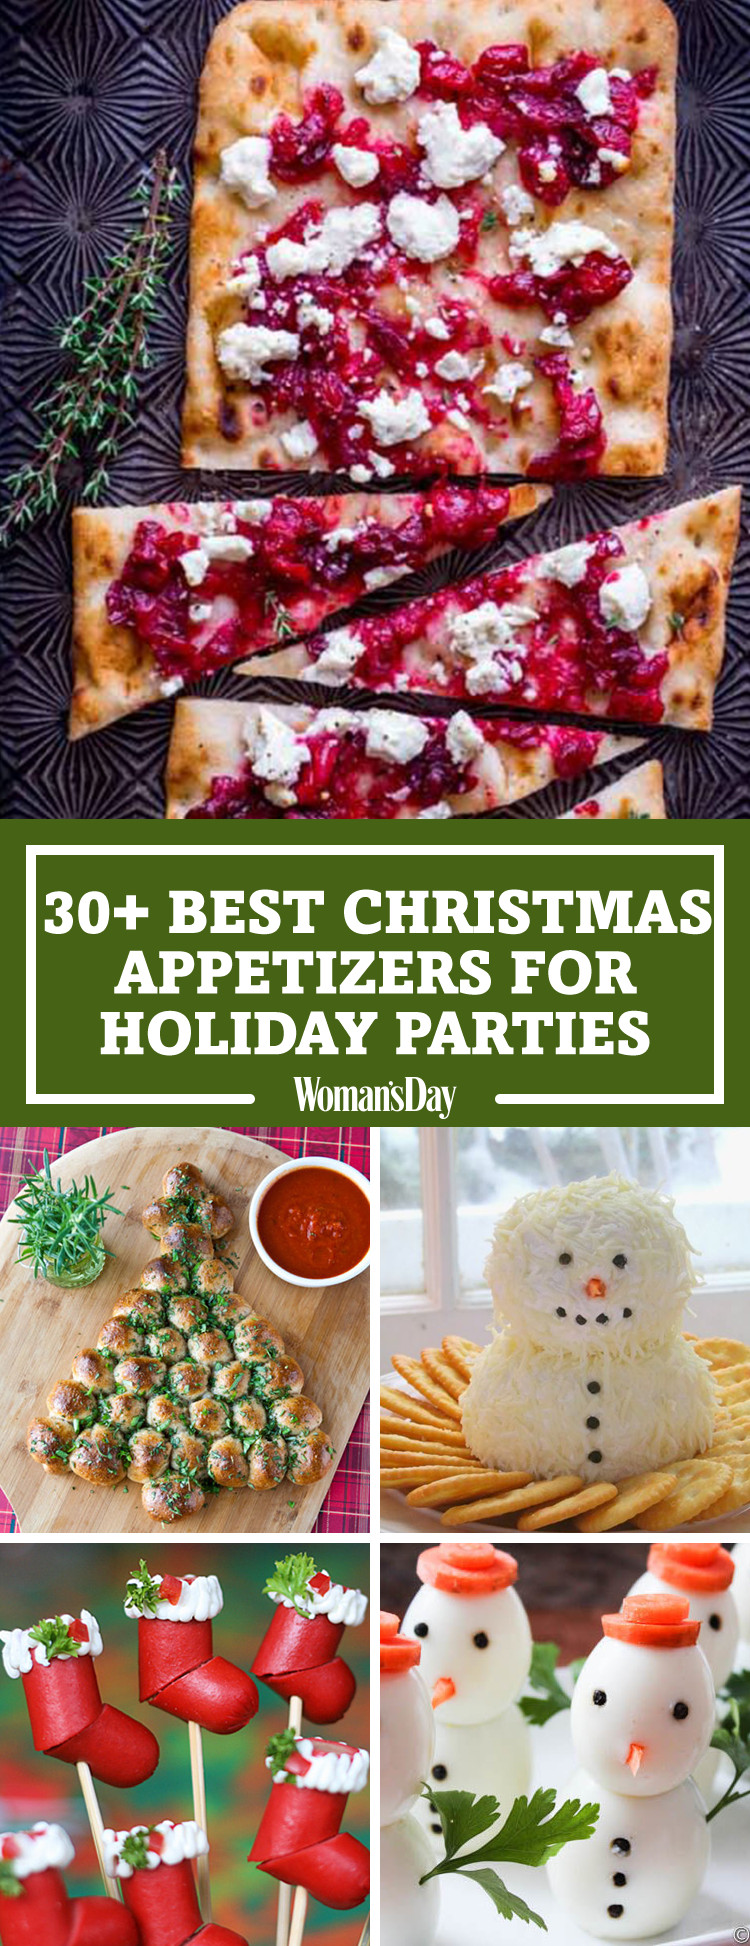 Good Christmas Appetizers
 30 Easy Christmas Party Appetizers Best Recipes for